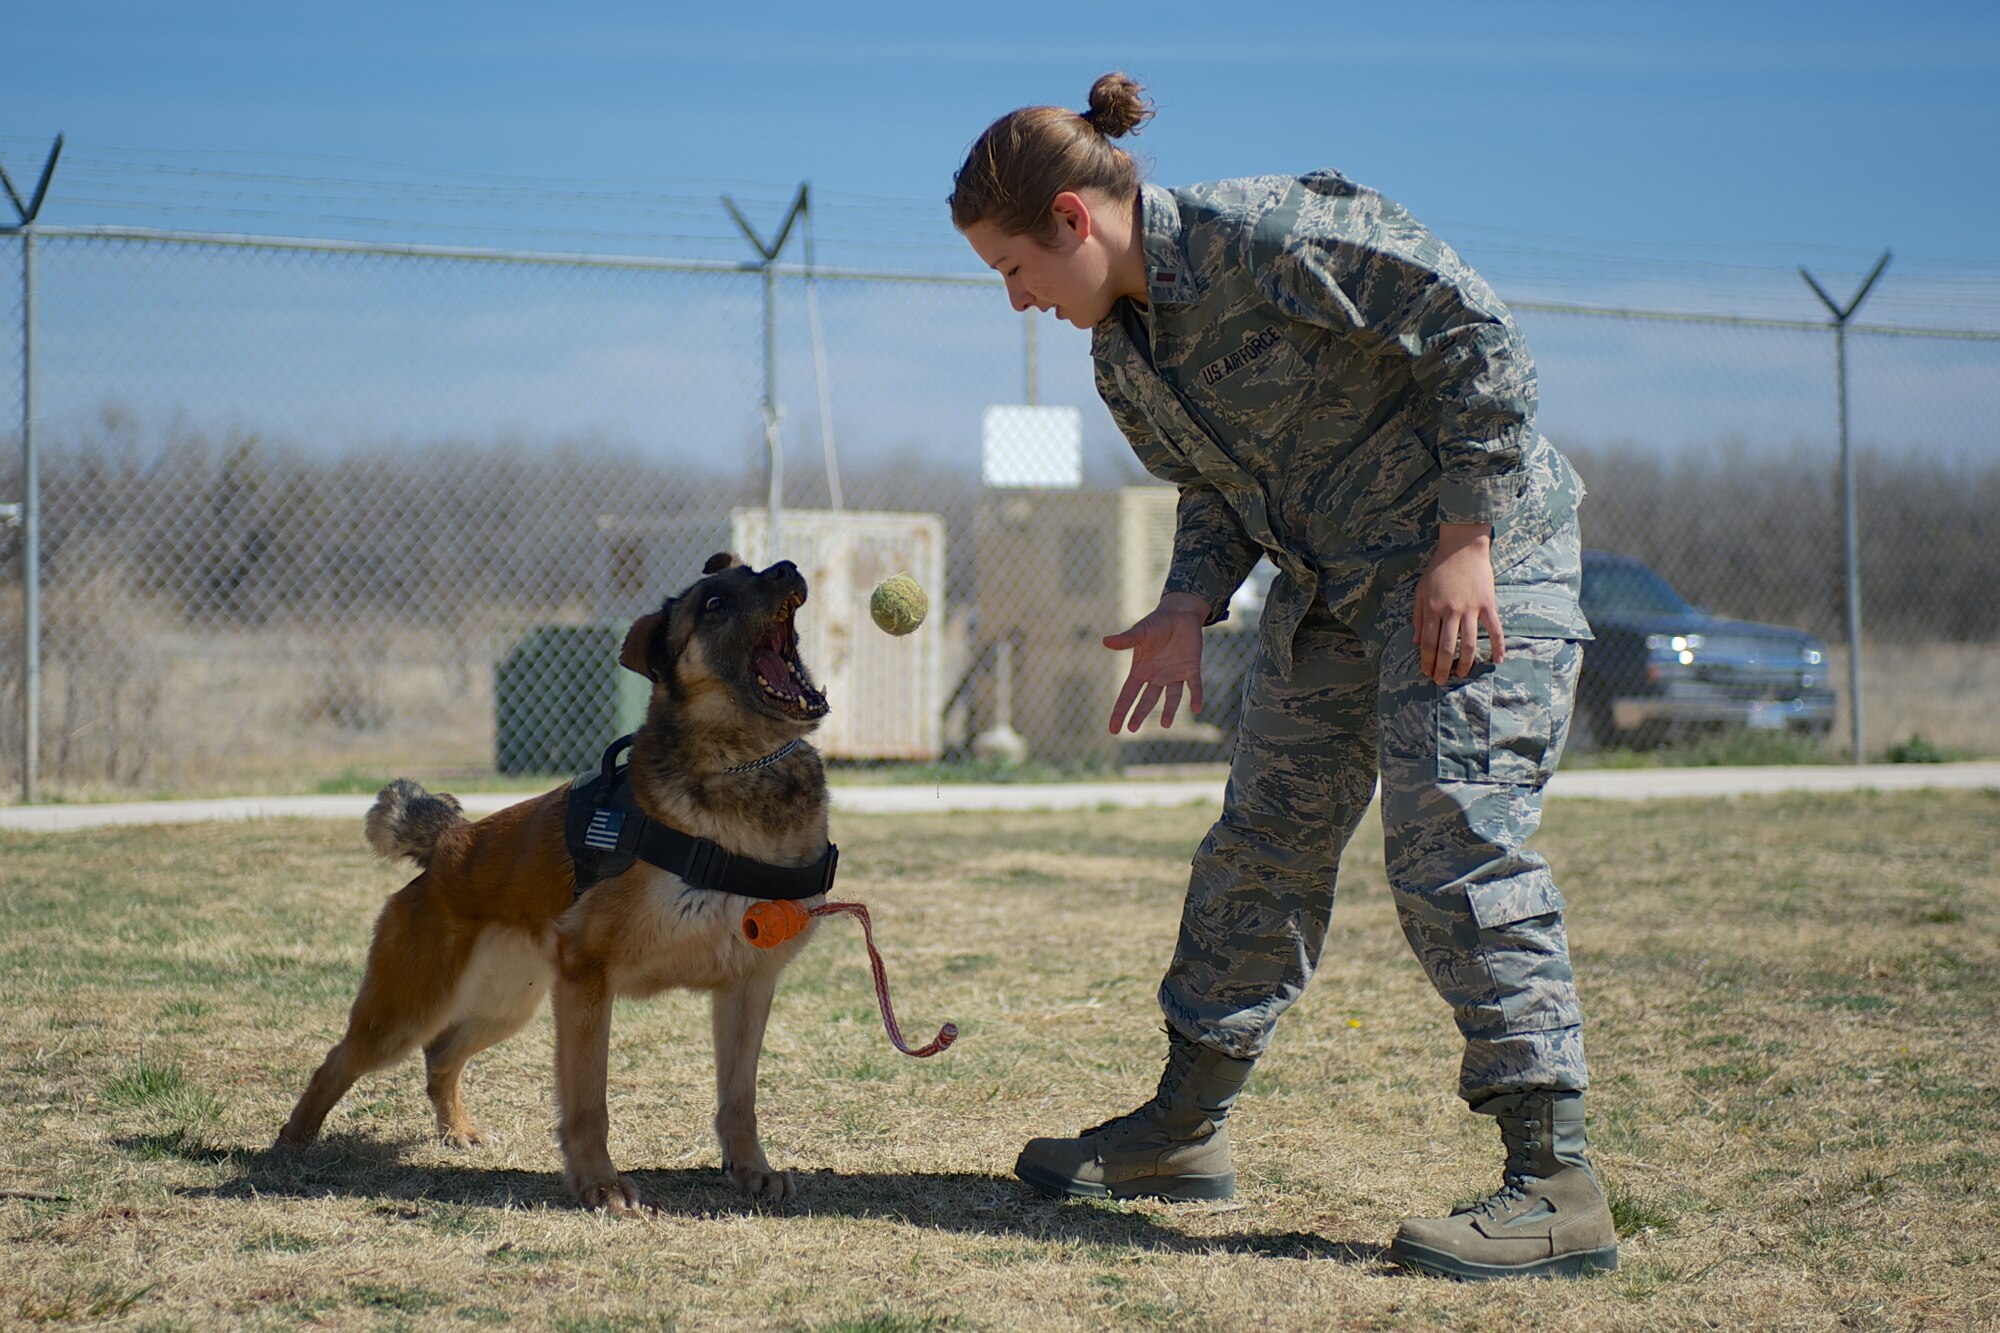 U.S. Air Force 2nd. Lt. Karrissa Garza, 7th Logistics Readiness Squadron, plays with military working dog (MWD) Condor March 26, 2013, at the 7th Security Forces Squadron MWD Compound on Dyess Air Force Base Texas. Garza is in the process of adopting Condor upon his retirement from the Air Force and pays frequent visits in order to form a bond with the dog. Condor, an 8 year old belgian malinois, is a veteran of Operation Iraqi Freedom as well as supported the U.S. Secret Service. (U.S. Air Force Photo by Tech. Sgt. Joshua T. Jasper/Released)
